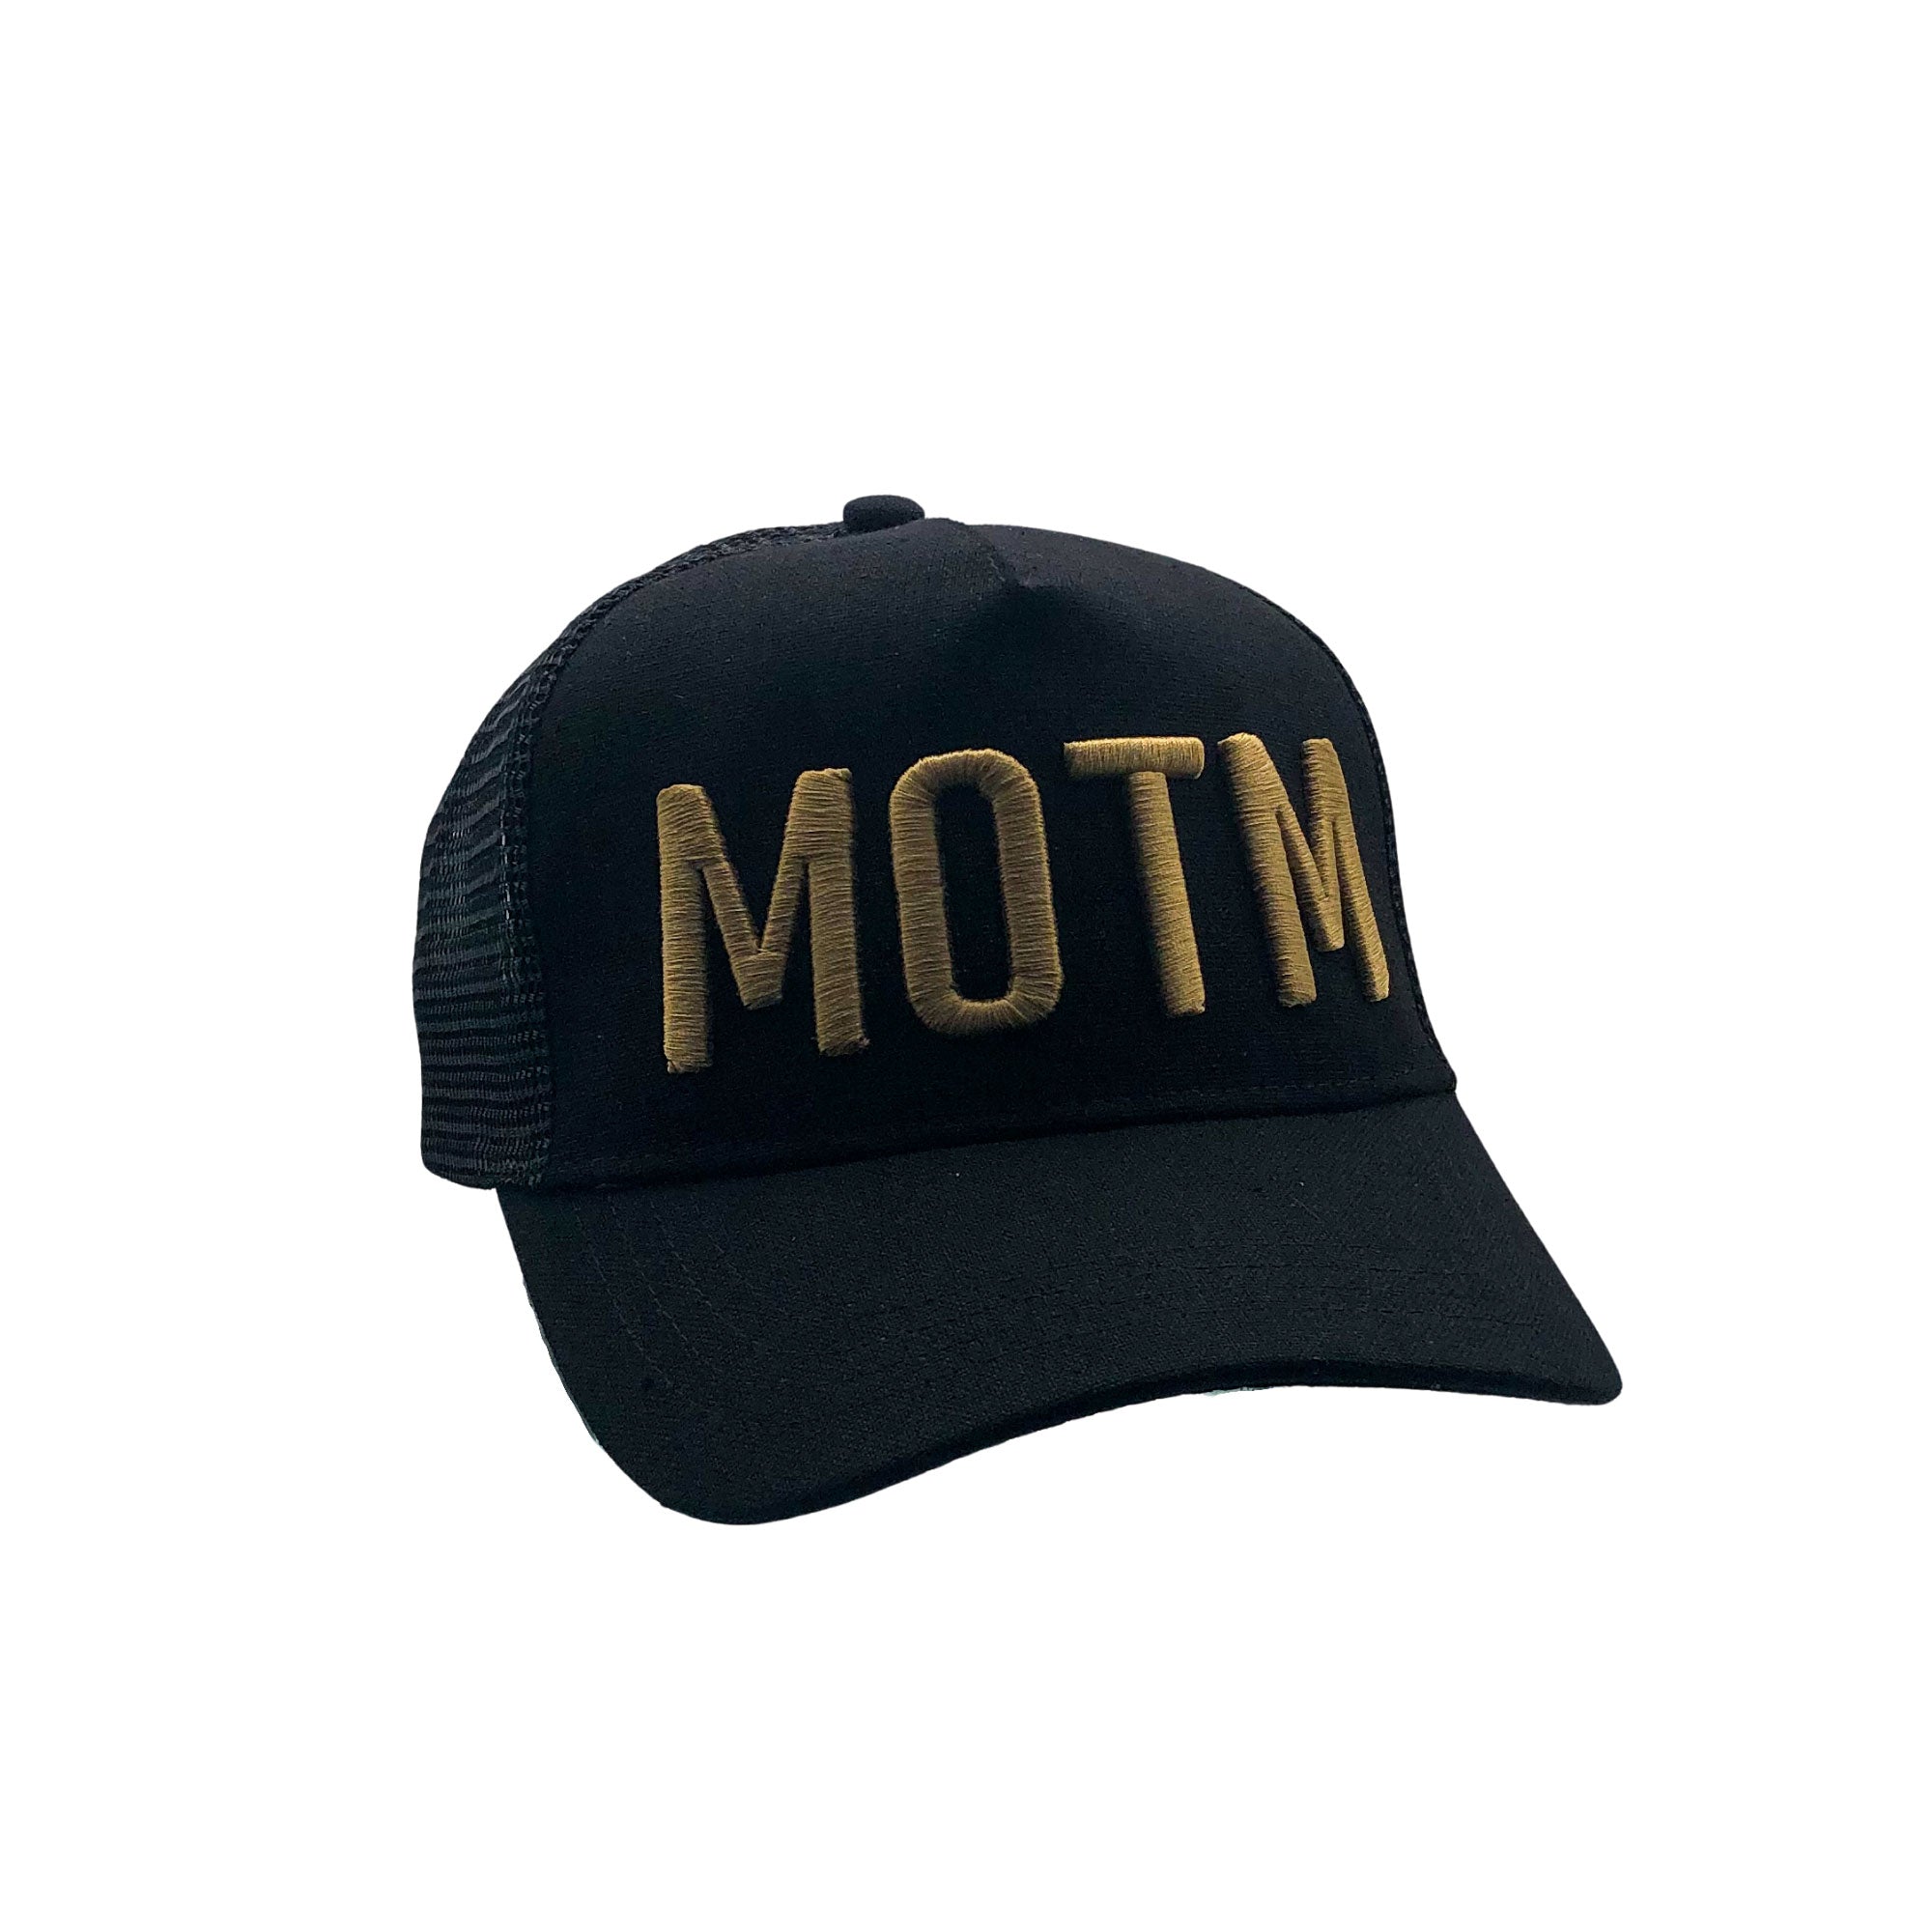 MAN OF THE MATCH® Official Cap - MOTM ICON 3D Embroidered Gold on Black - Premium Linen